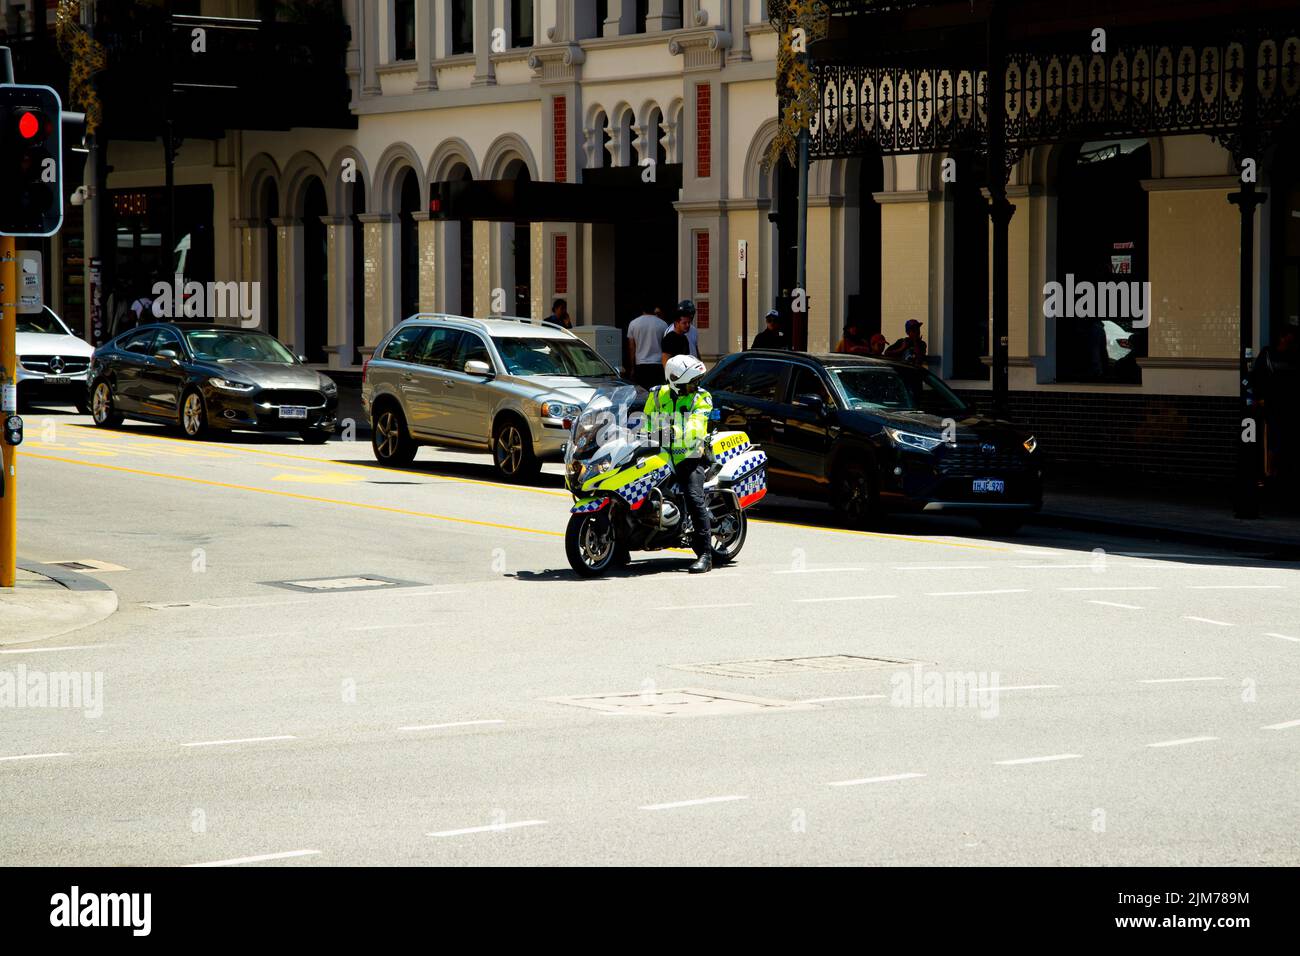 Perth, Australia - November 20, 2021: Traffic enforcement police motorcycle in the city Stock Photo